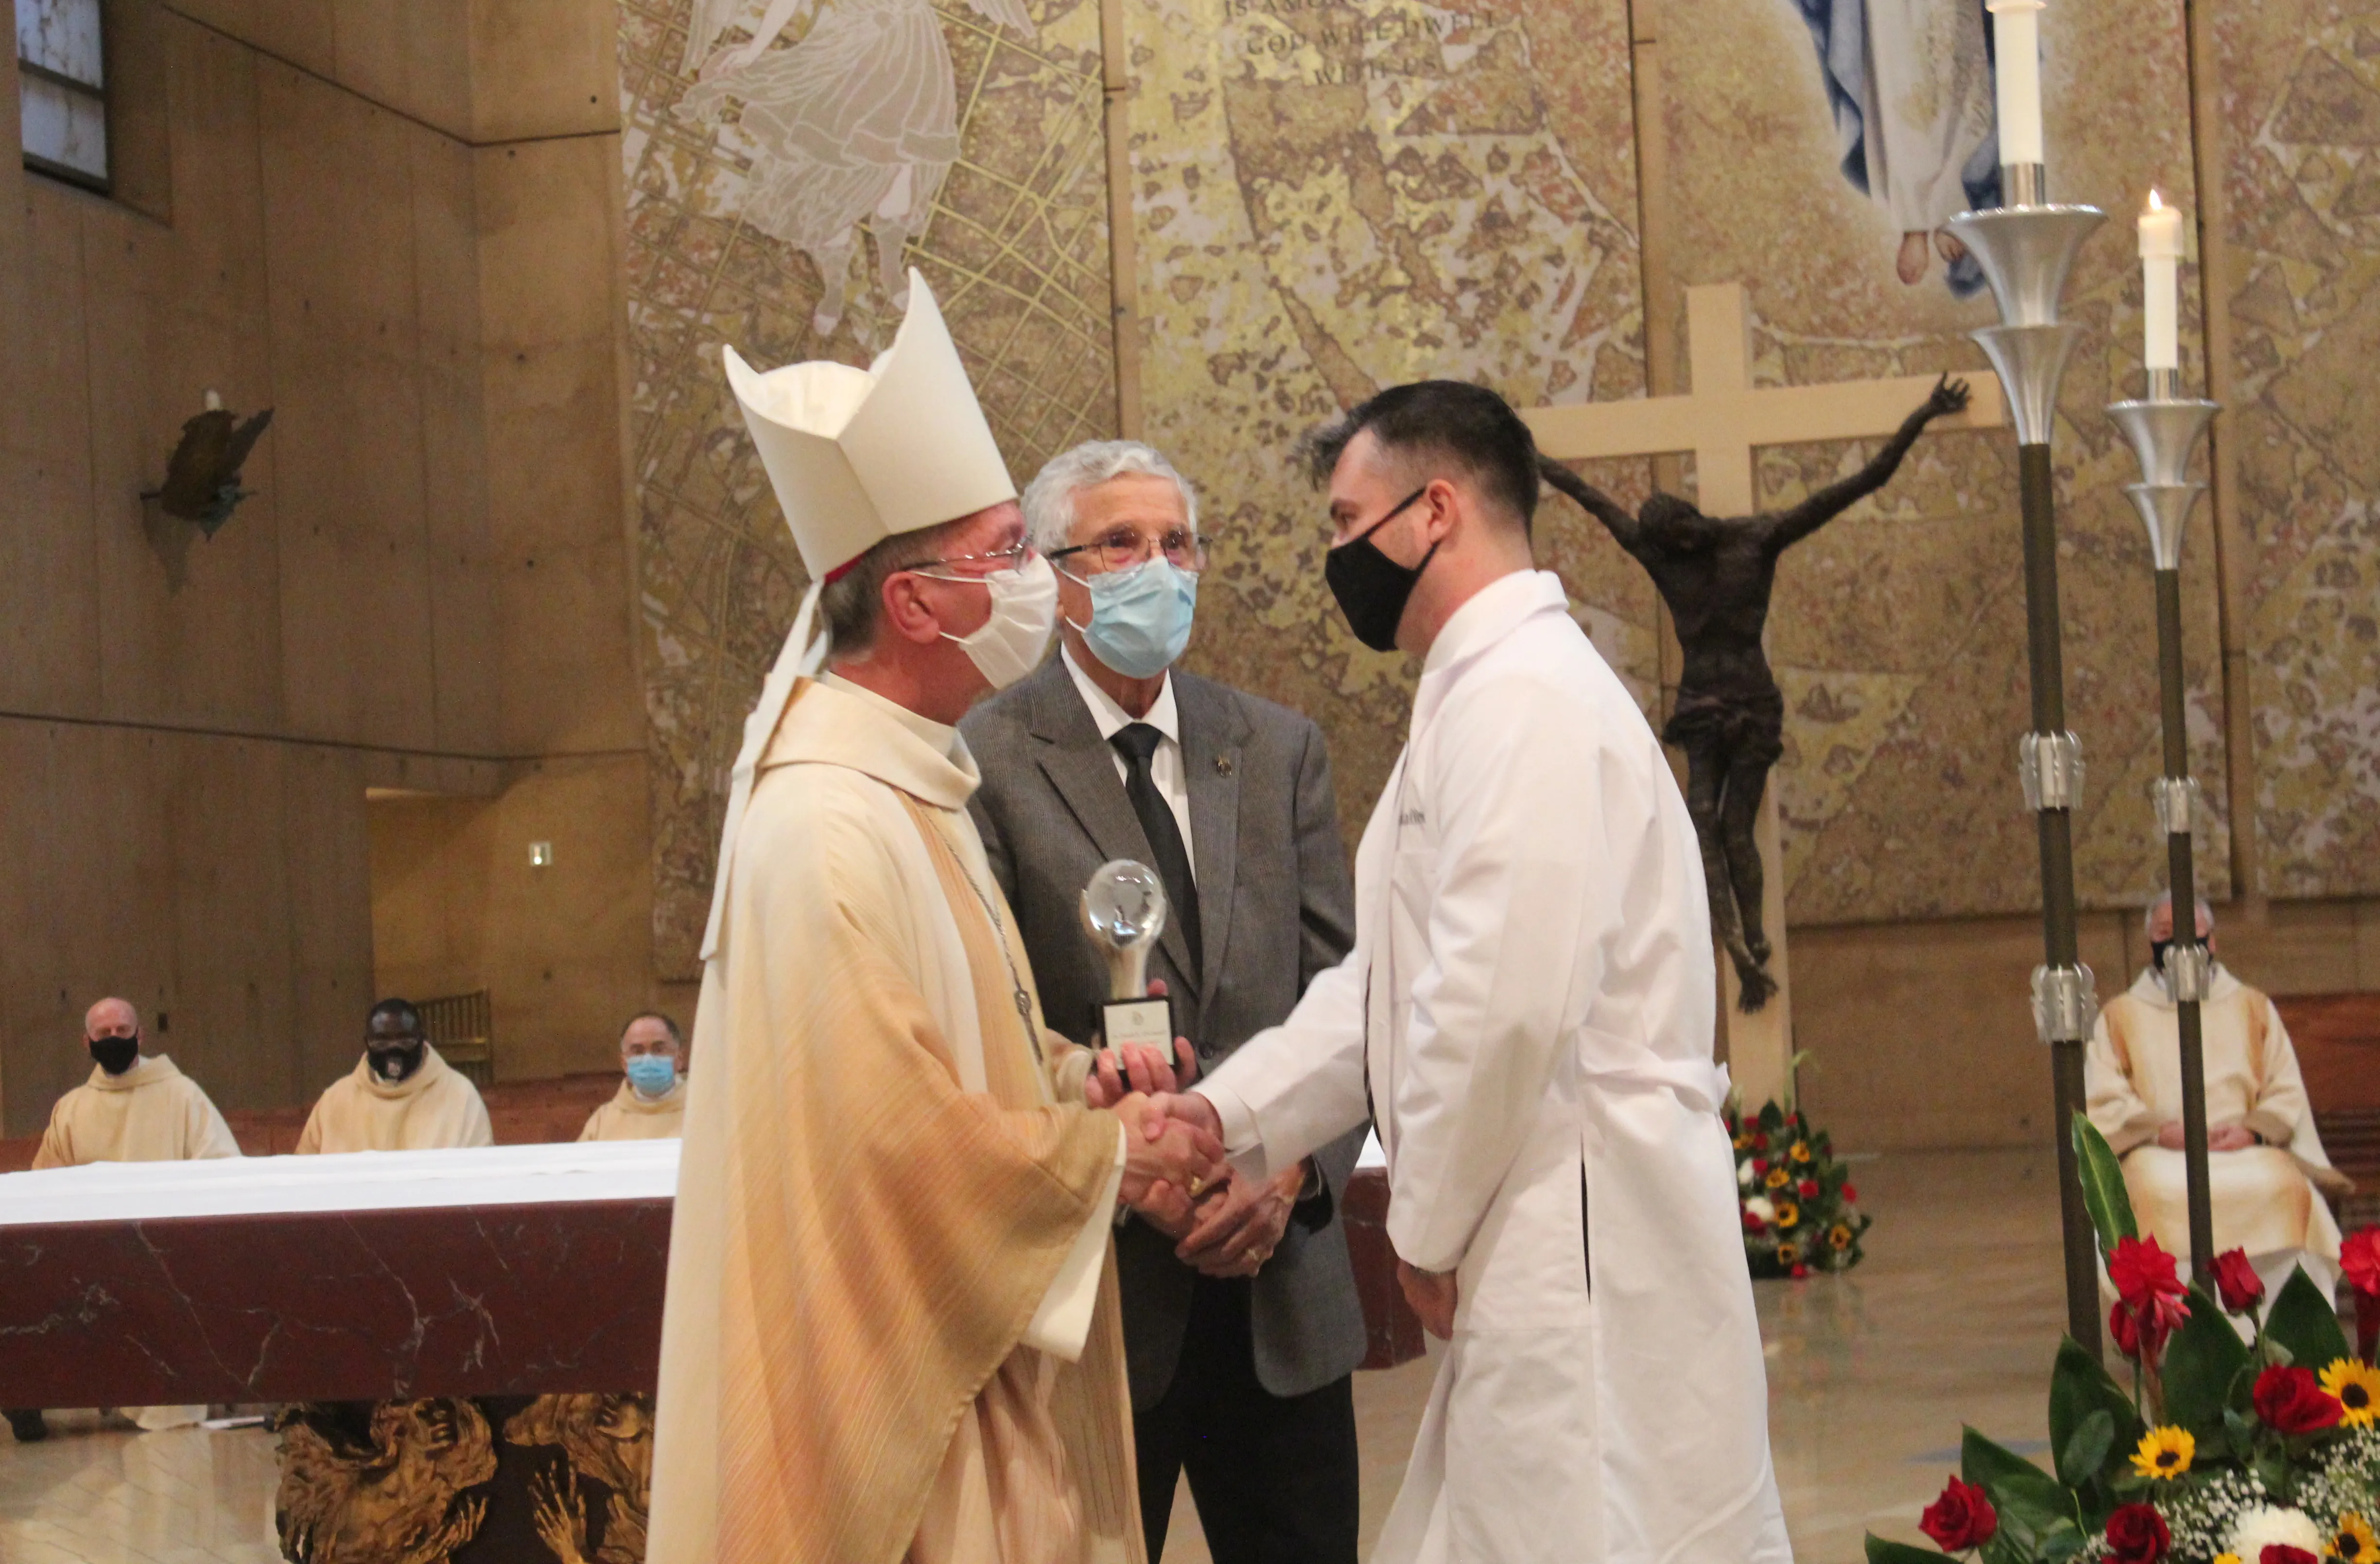 Major Daniel E. O'Connell, MD, MPH, receives the 2021 Catholic Doctor of the Year Award on Oct. 24, during the Archdiocese of Los Angeles’ annual Mass for Catholic Healthcare Professionals.?w=200&h=150